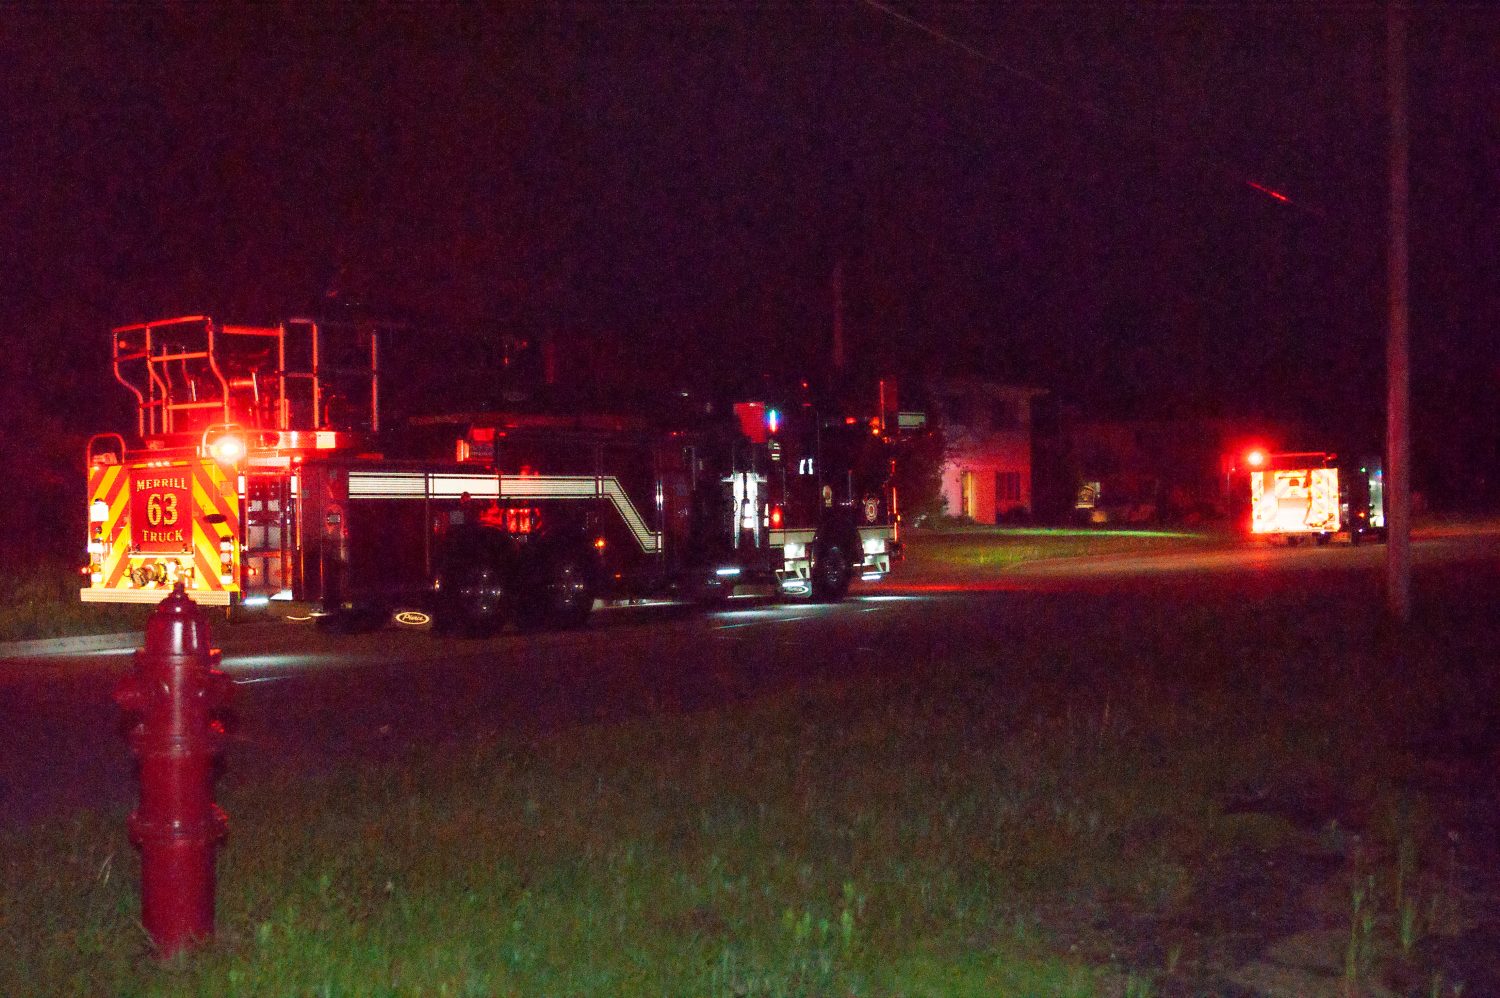 Friday night apartment fire starts on stove